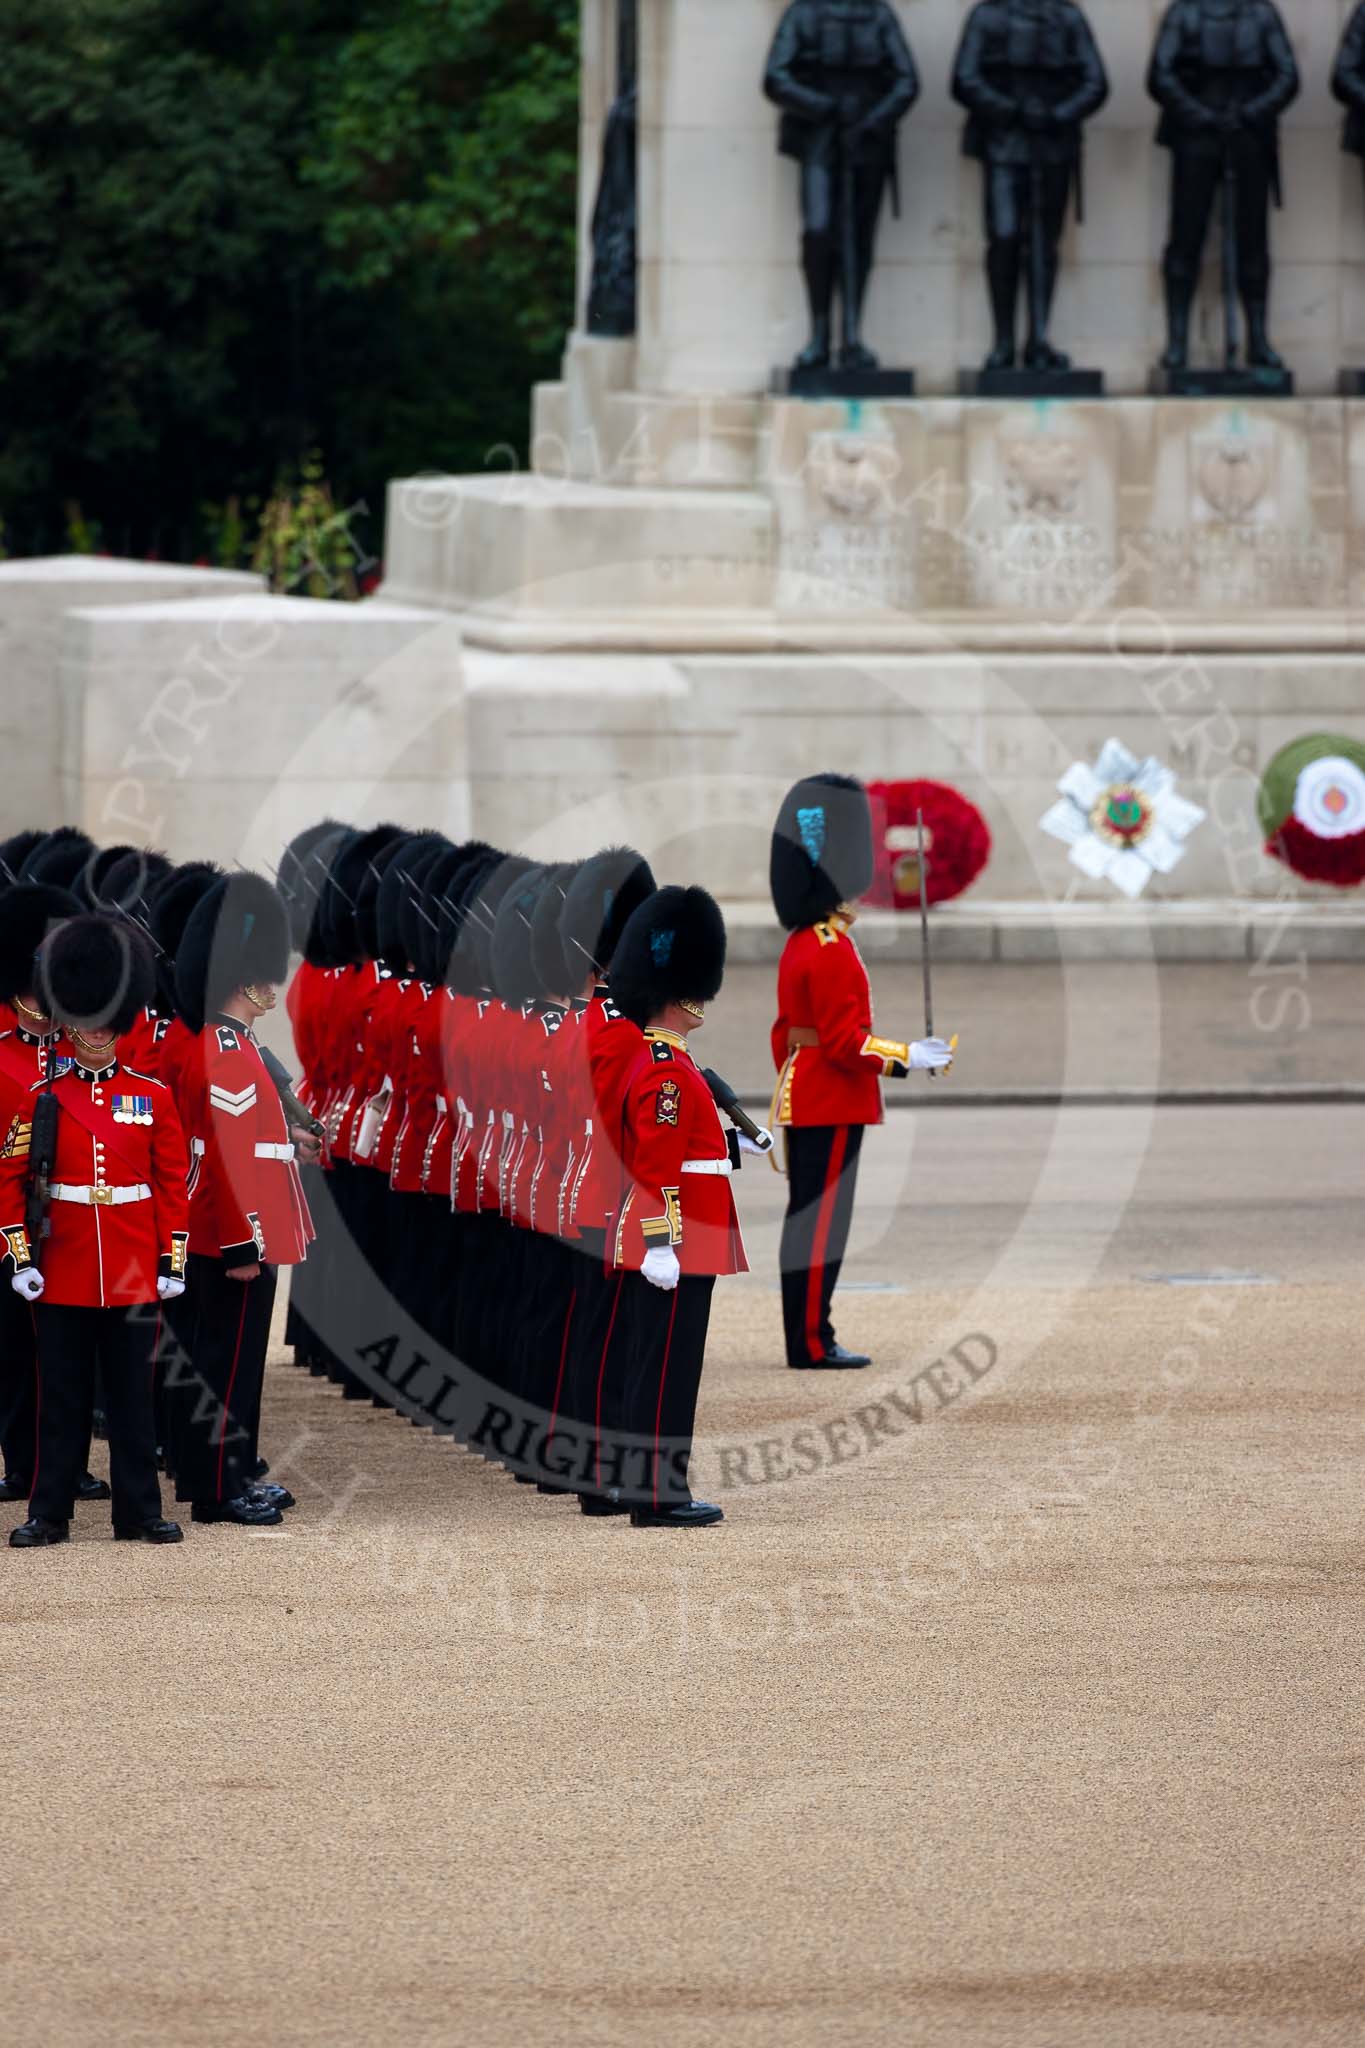 Trooping the Colour 2009: No. 3 Guard, 1st Battalion Irish Guards has opened ranks to give way for the Royal Procession..
Horse Guards Parade, Westminster,
London SW1,

United Kingdom,
on 13 June 2009 at 10:44, image #86